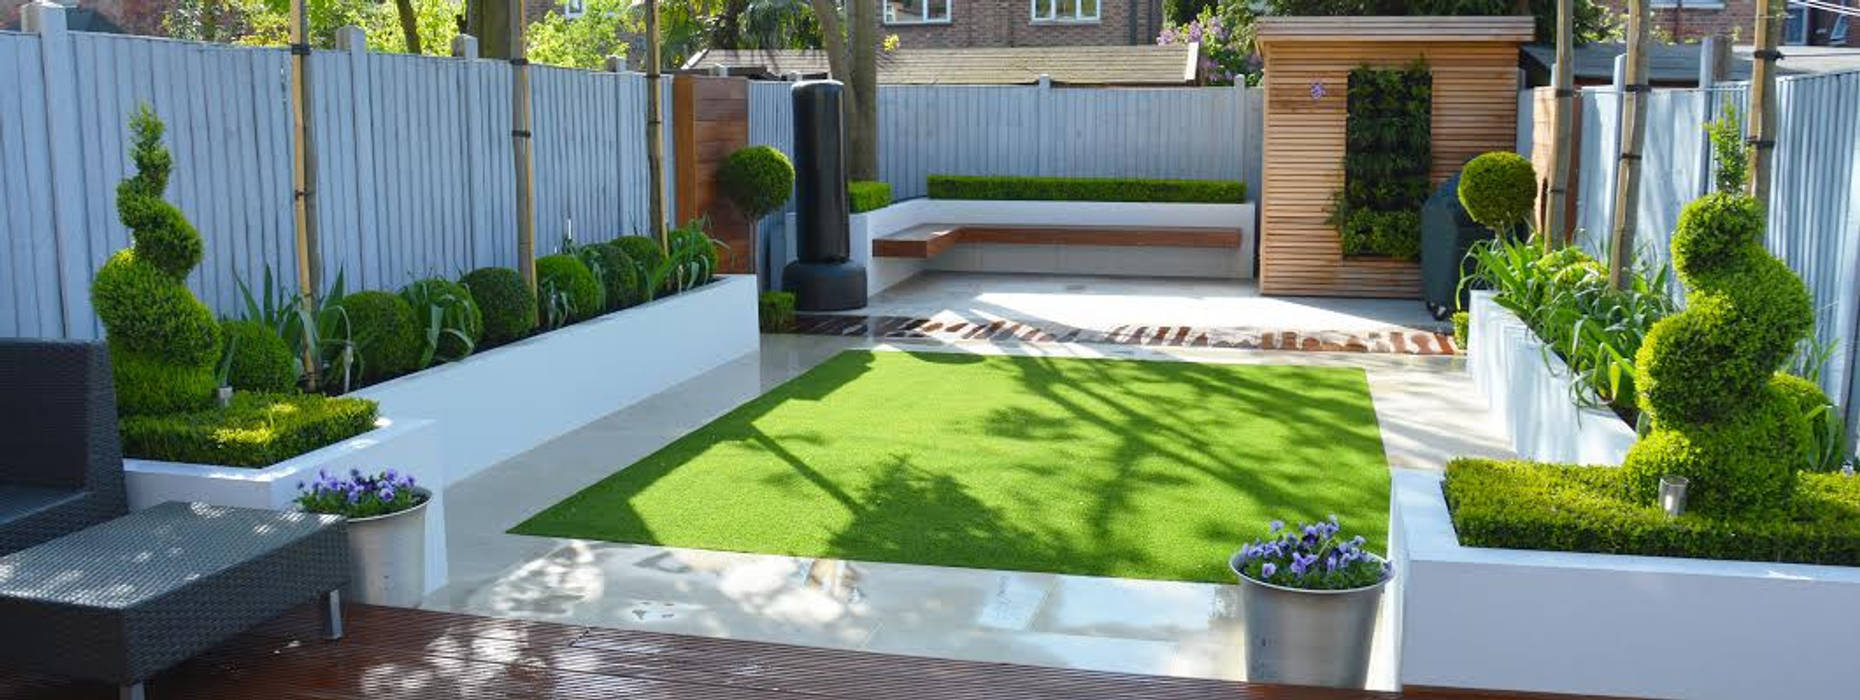 Minimalist Garden: Amazing relaxing space that you will fall in love with, Landscaper in London Landscaper in London Сад в стиле модерн